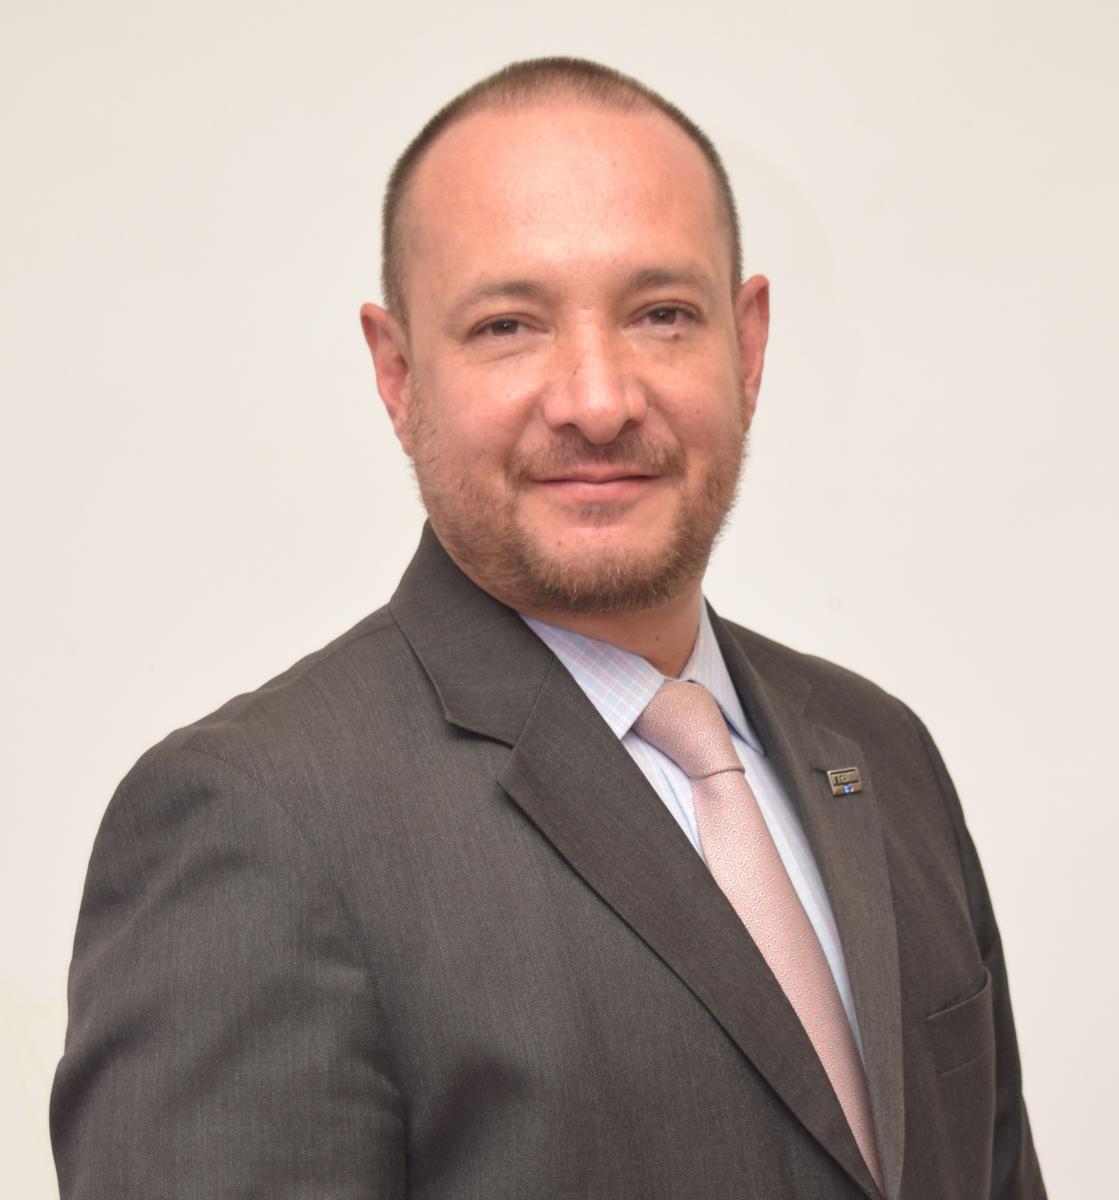 Horacio Vives, appointed Local Councilor of the INE for Mexico City